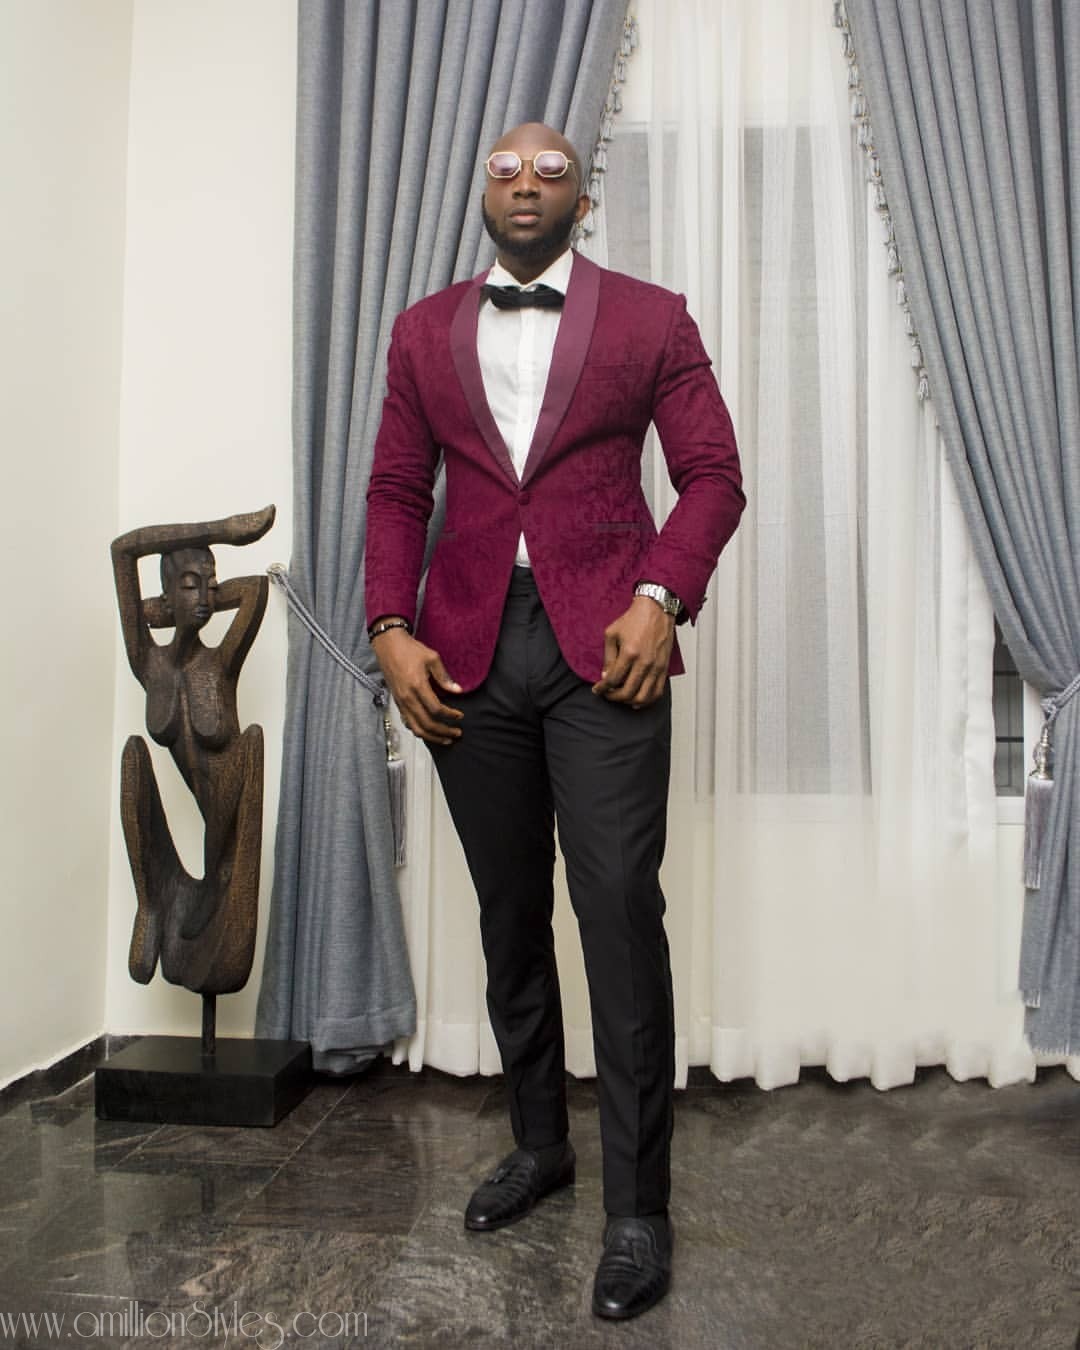 Our Favorite Looks From The AMAA 2019 Red Carpet